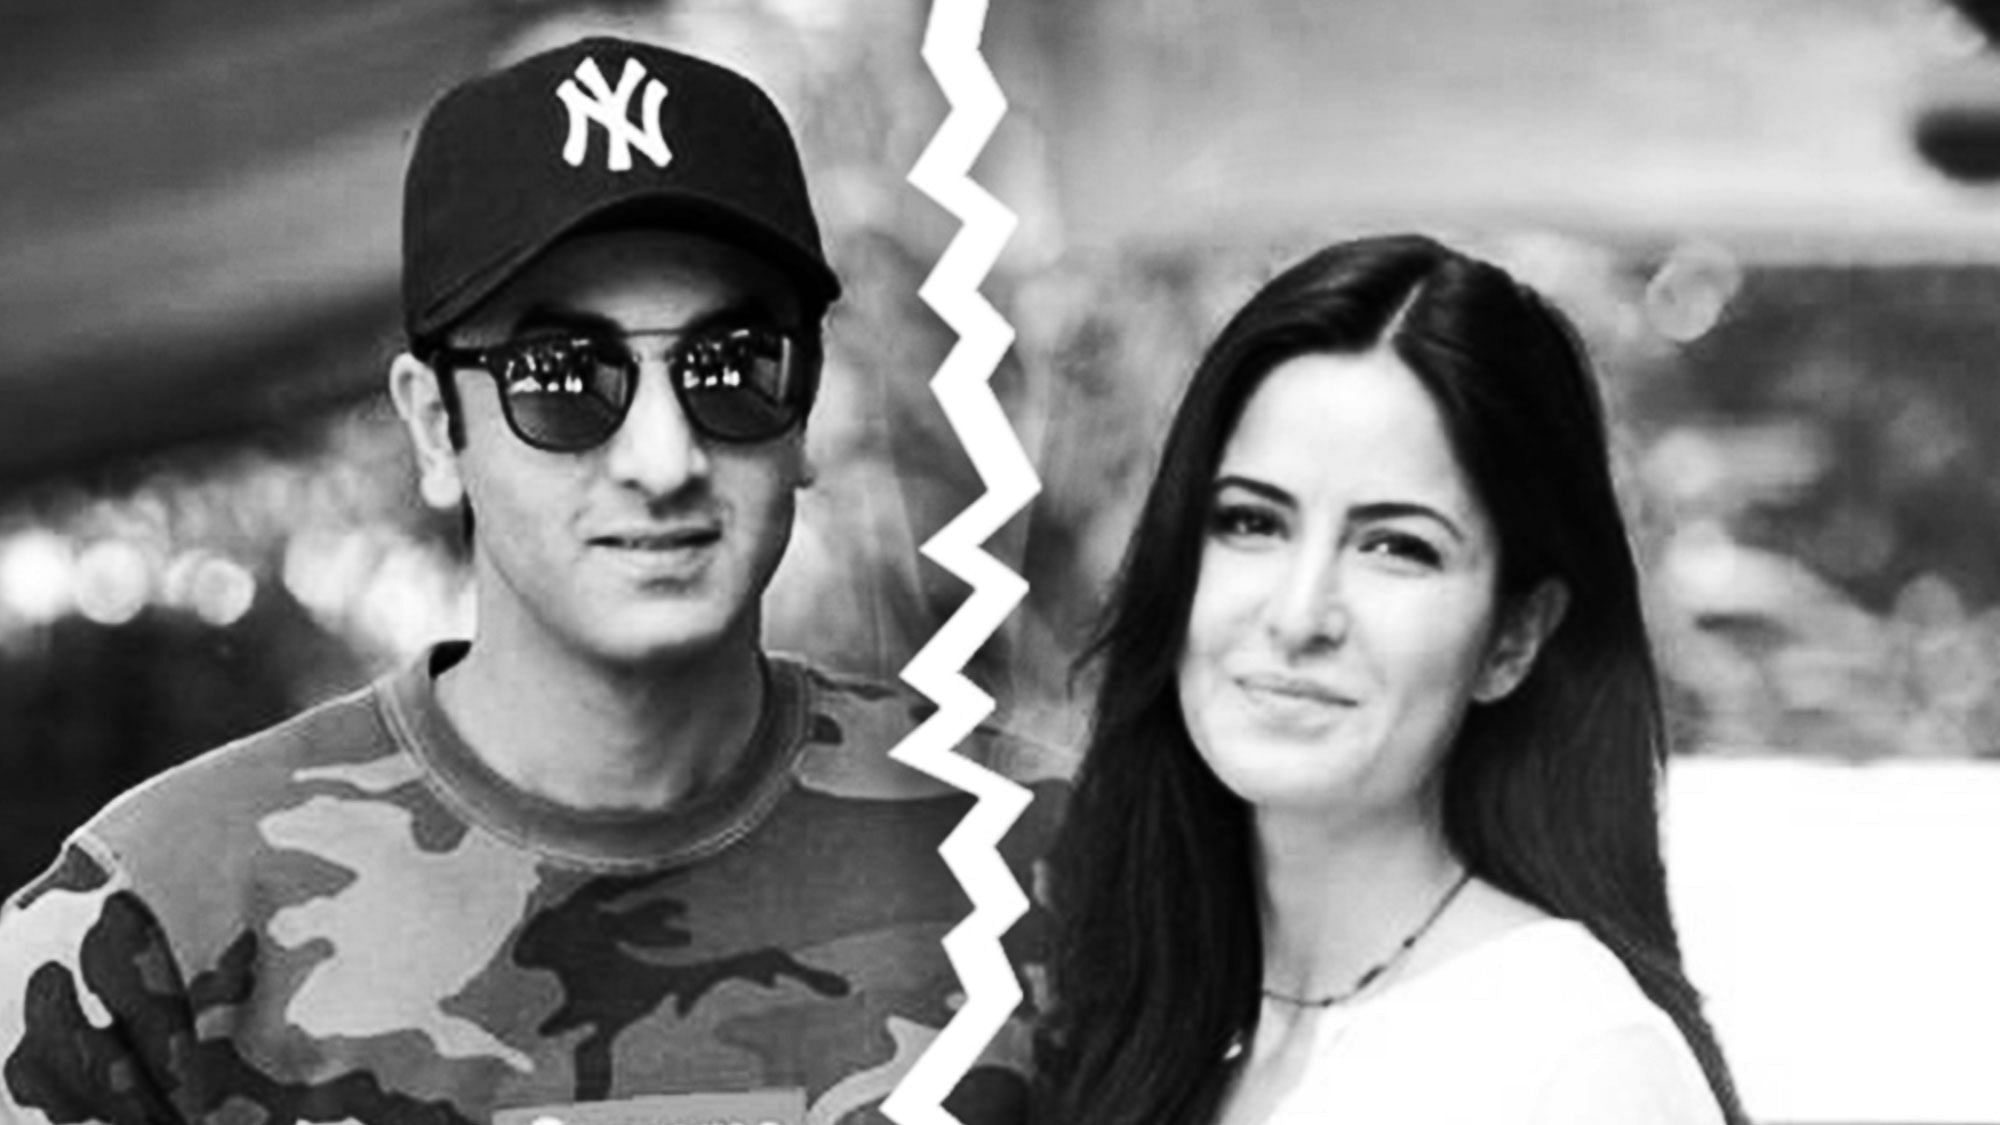 

Ranbir Kapoor and Katrina decided to partway this year. (Photo Courtesy: Facebook/<a href="https://www.facebook.com/Emirates247/">Emirates247</a>)